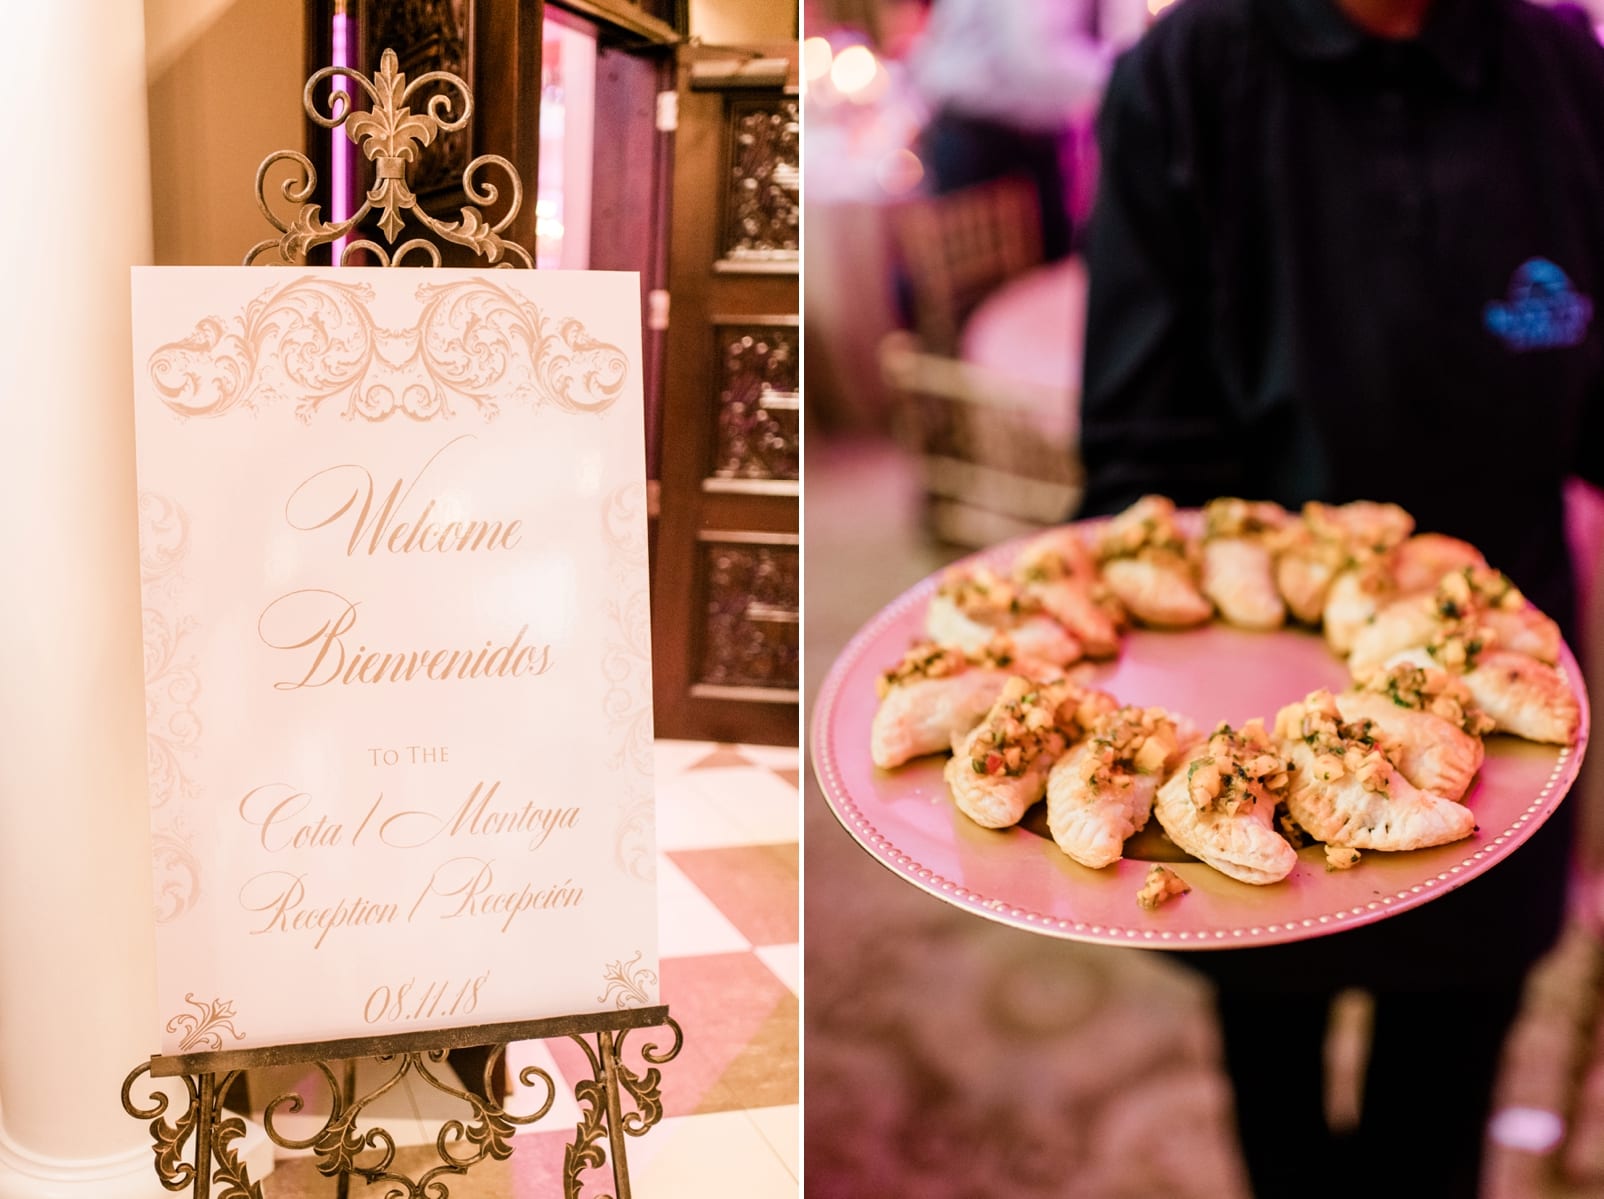 Grand Marquise ballroom wedding reception entrance sign and passed appetizers photo